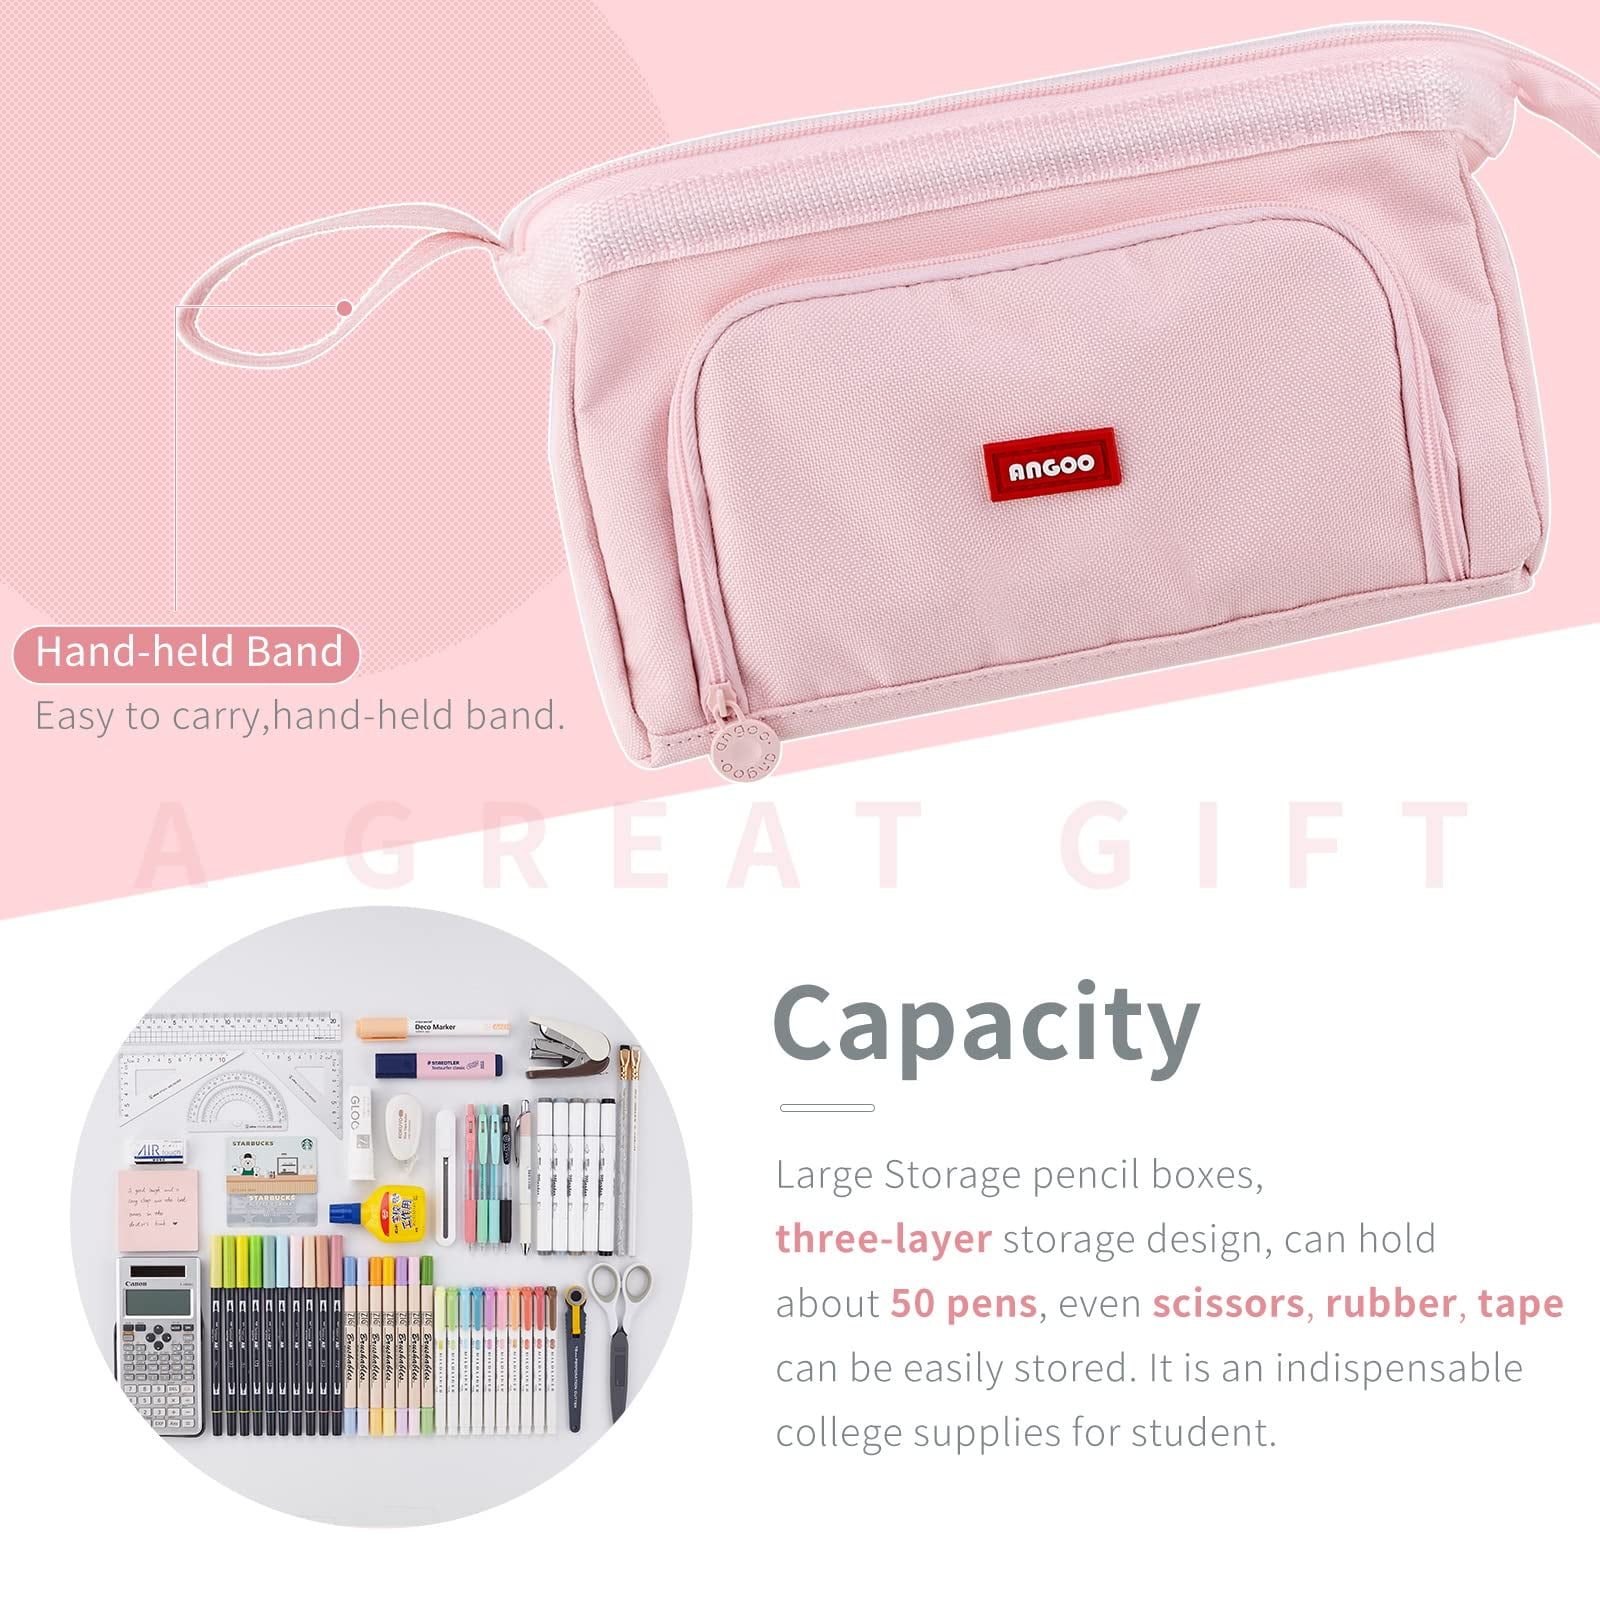 HAUTOCO Big Capacity Pencil Case Large Storage Pencil Pouch Canvas Handheld  Pen Bag Portable Makeup Bag Aesthetic Stationery Bag Holder Box Desk  Organizer for School Office Teen Girl Boy, Pink